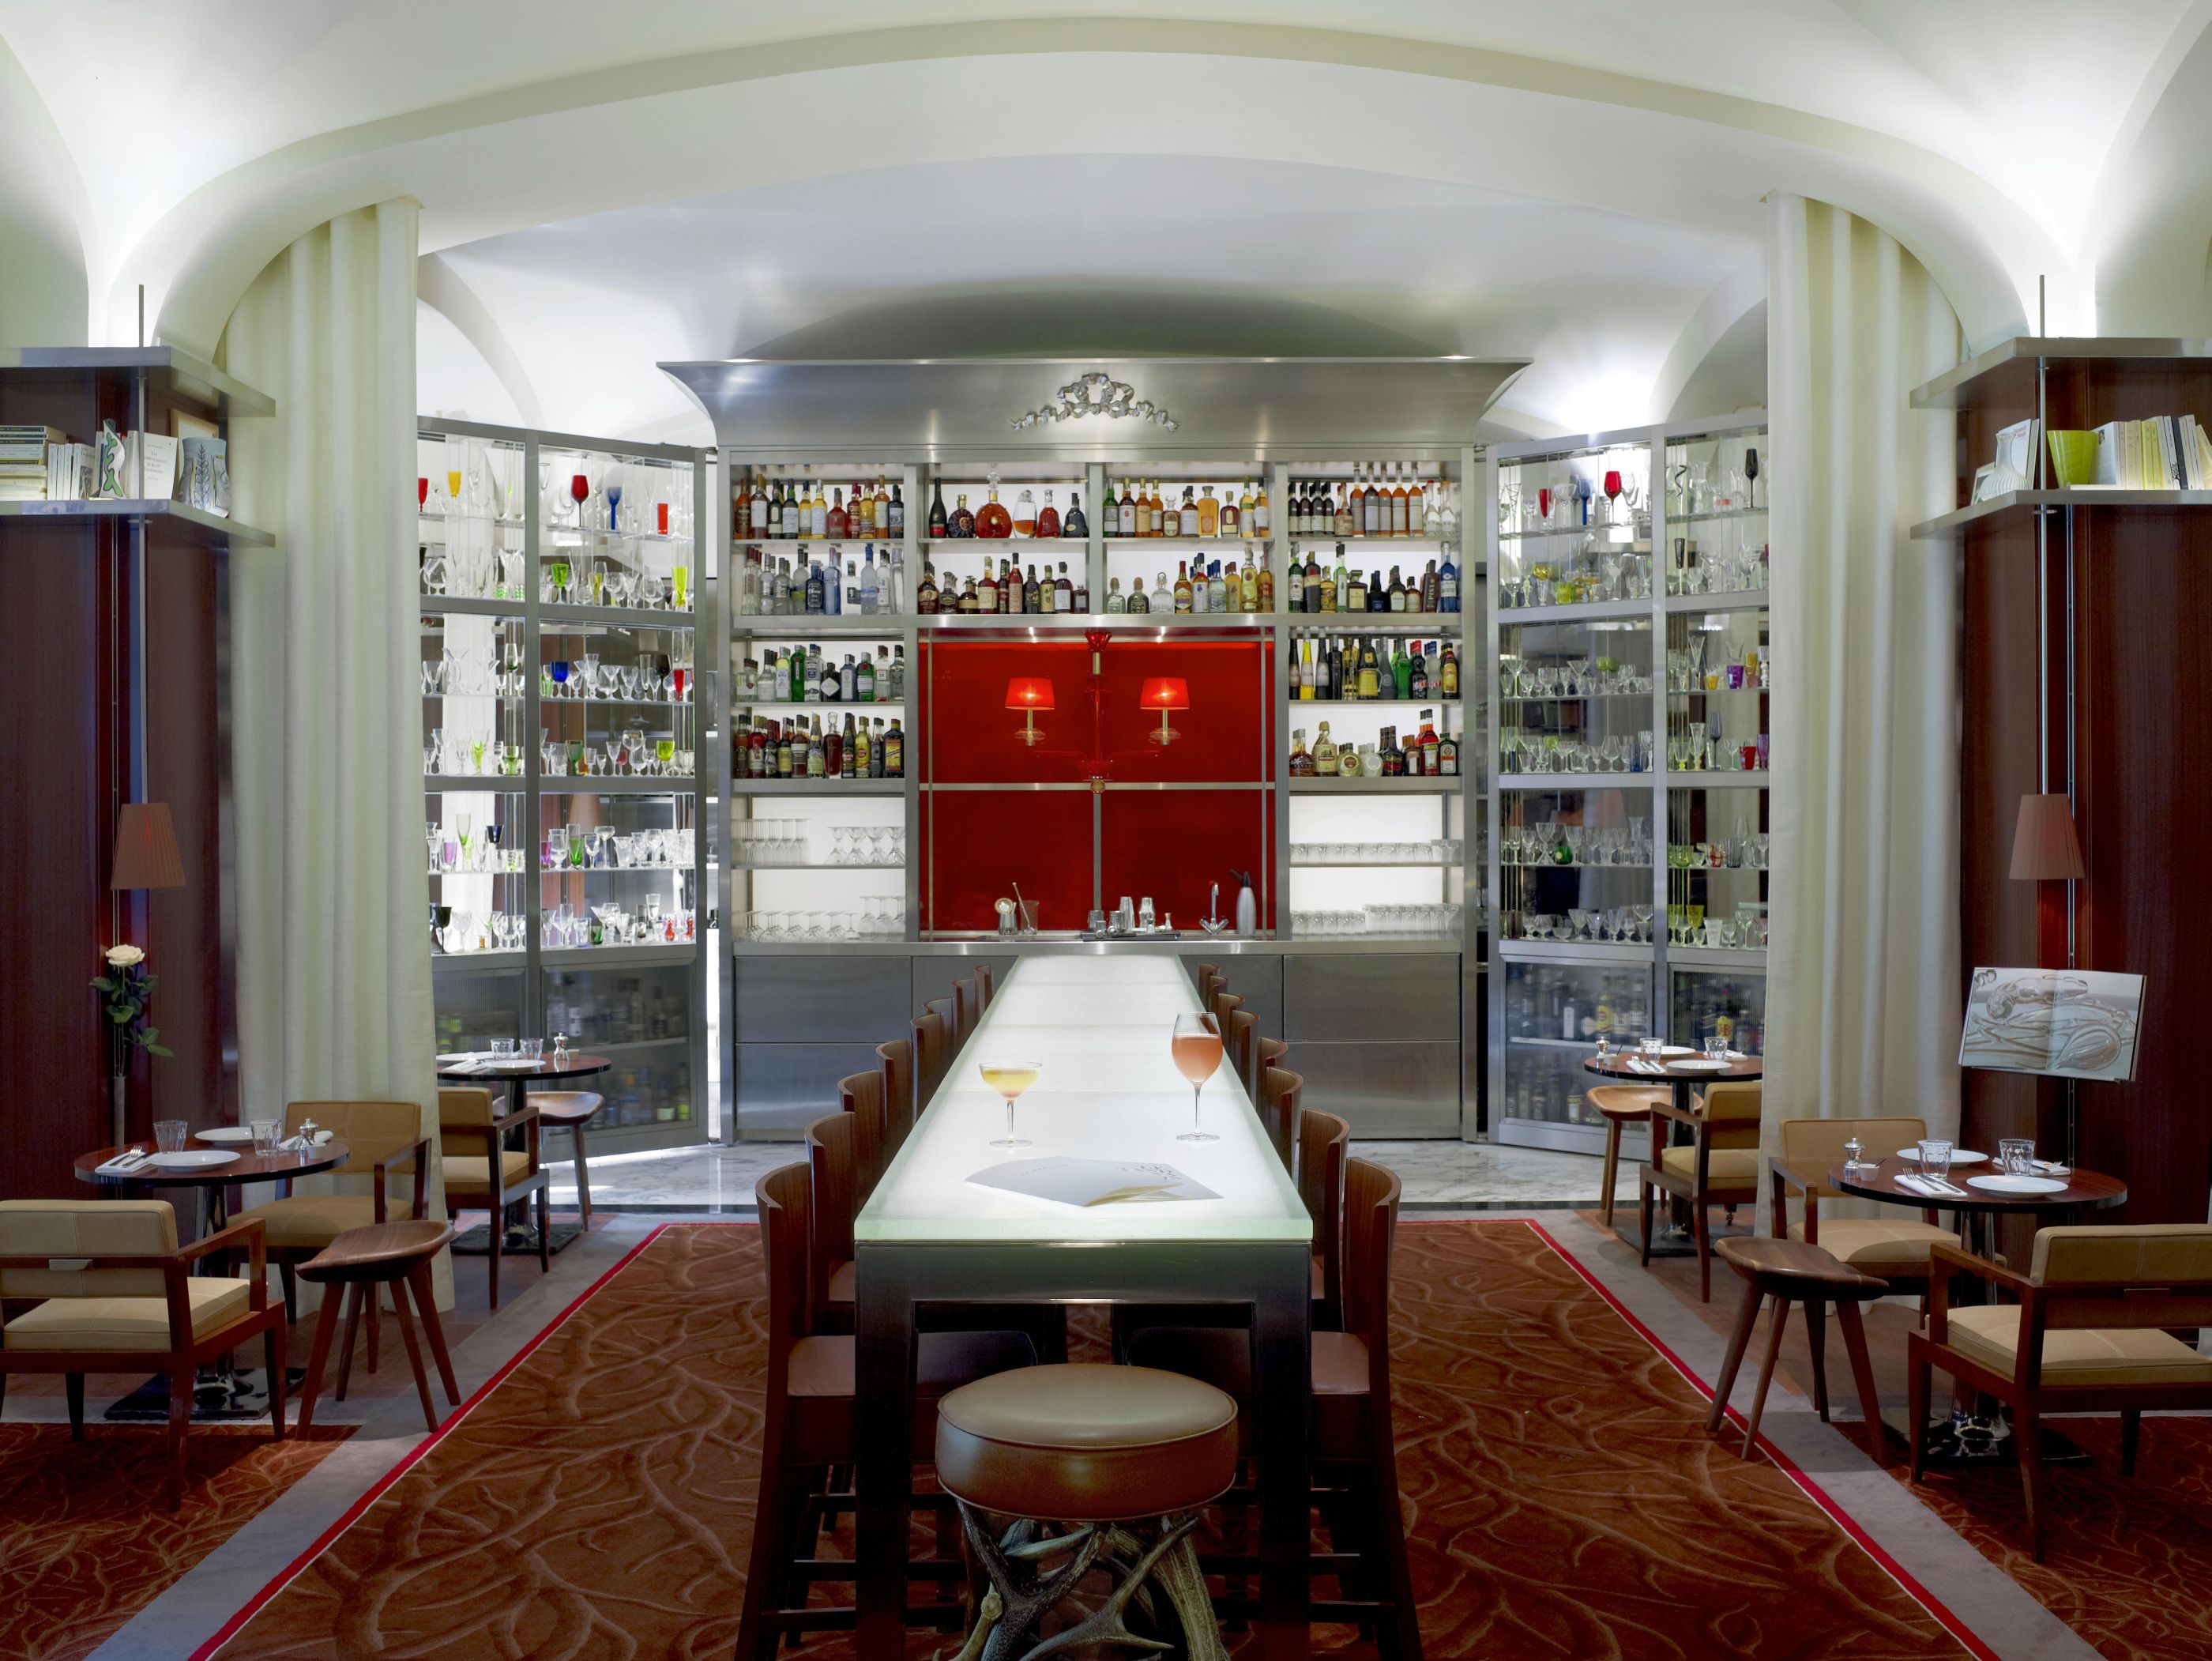 Dining hall in Le Royal Monceau, France